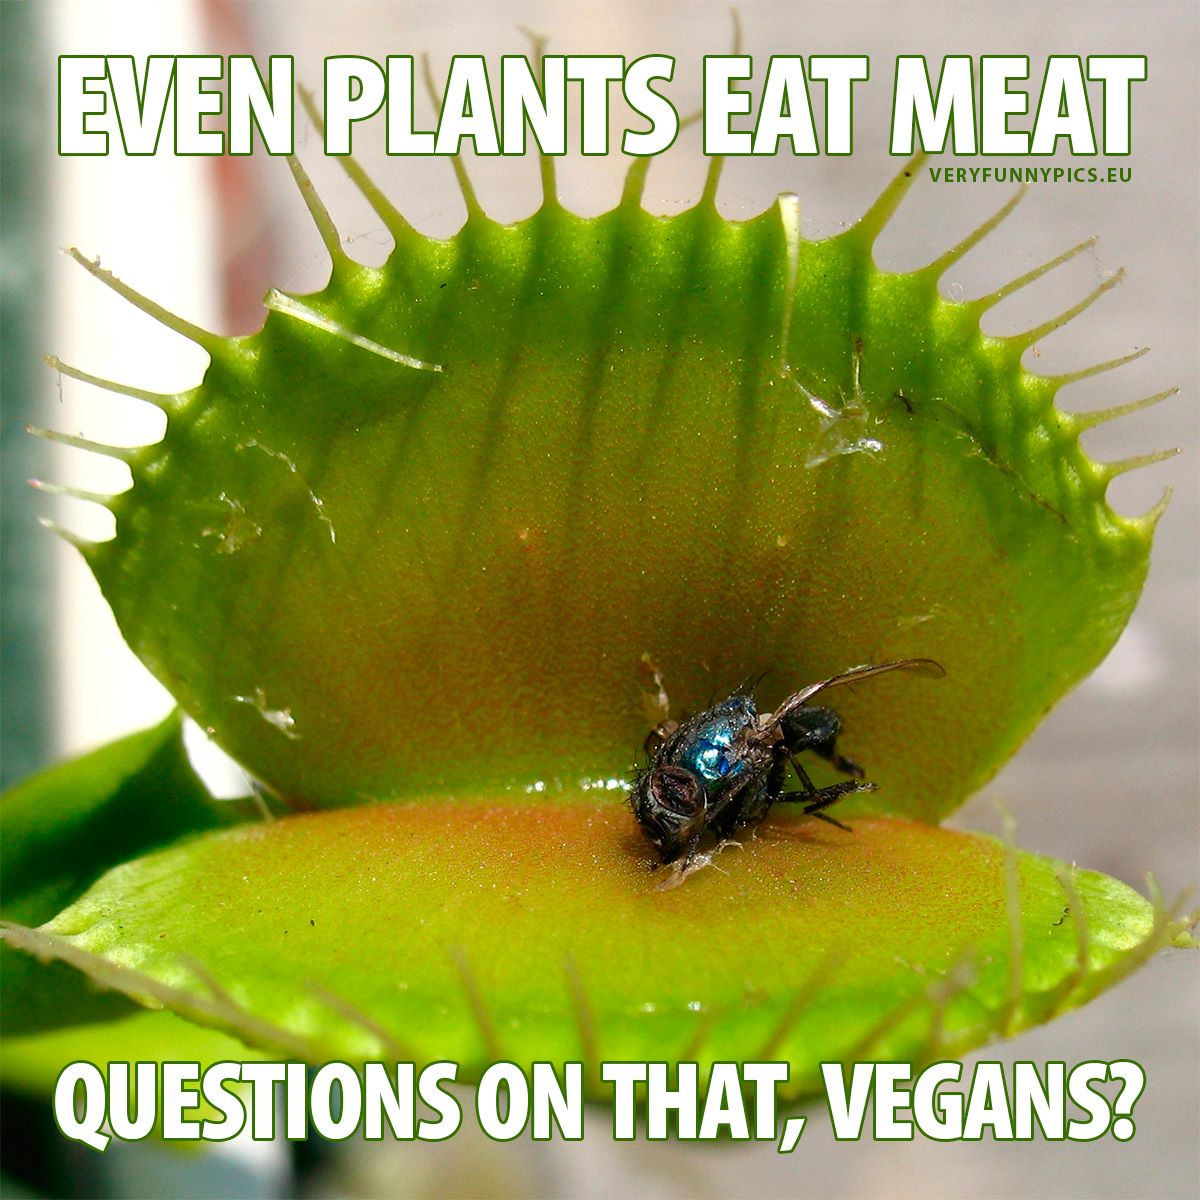 Meateating plant - Even plants eat meat